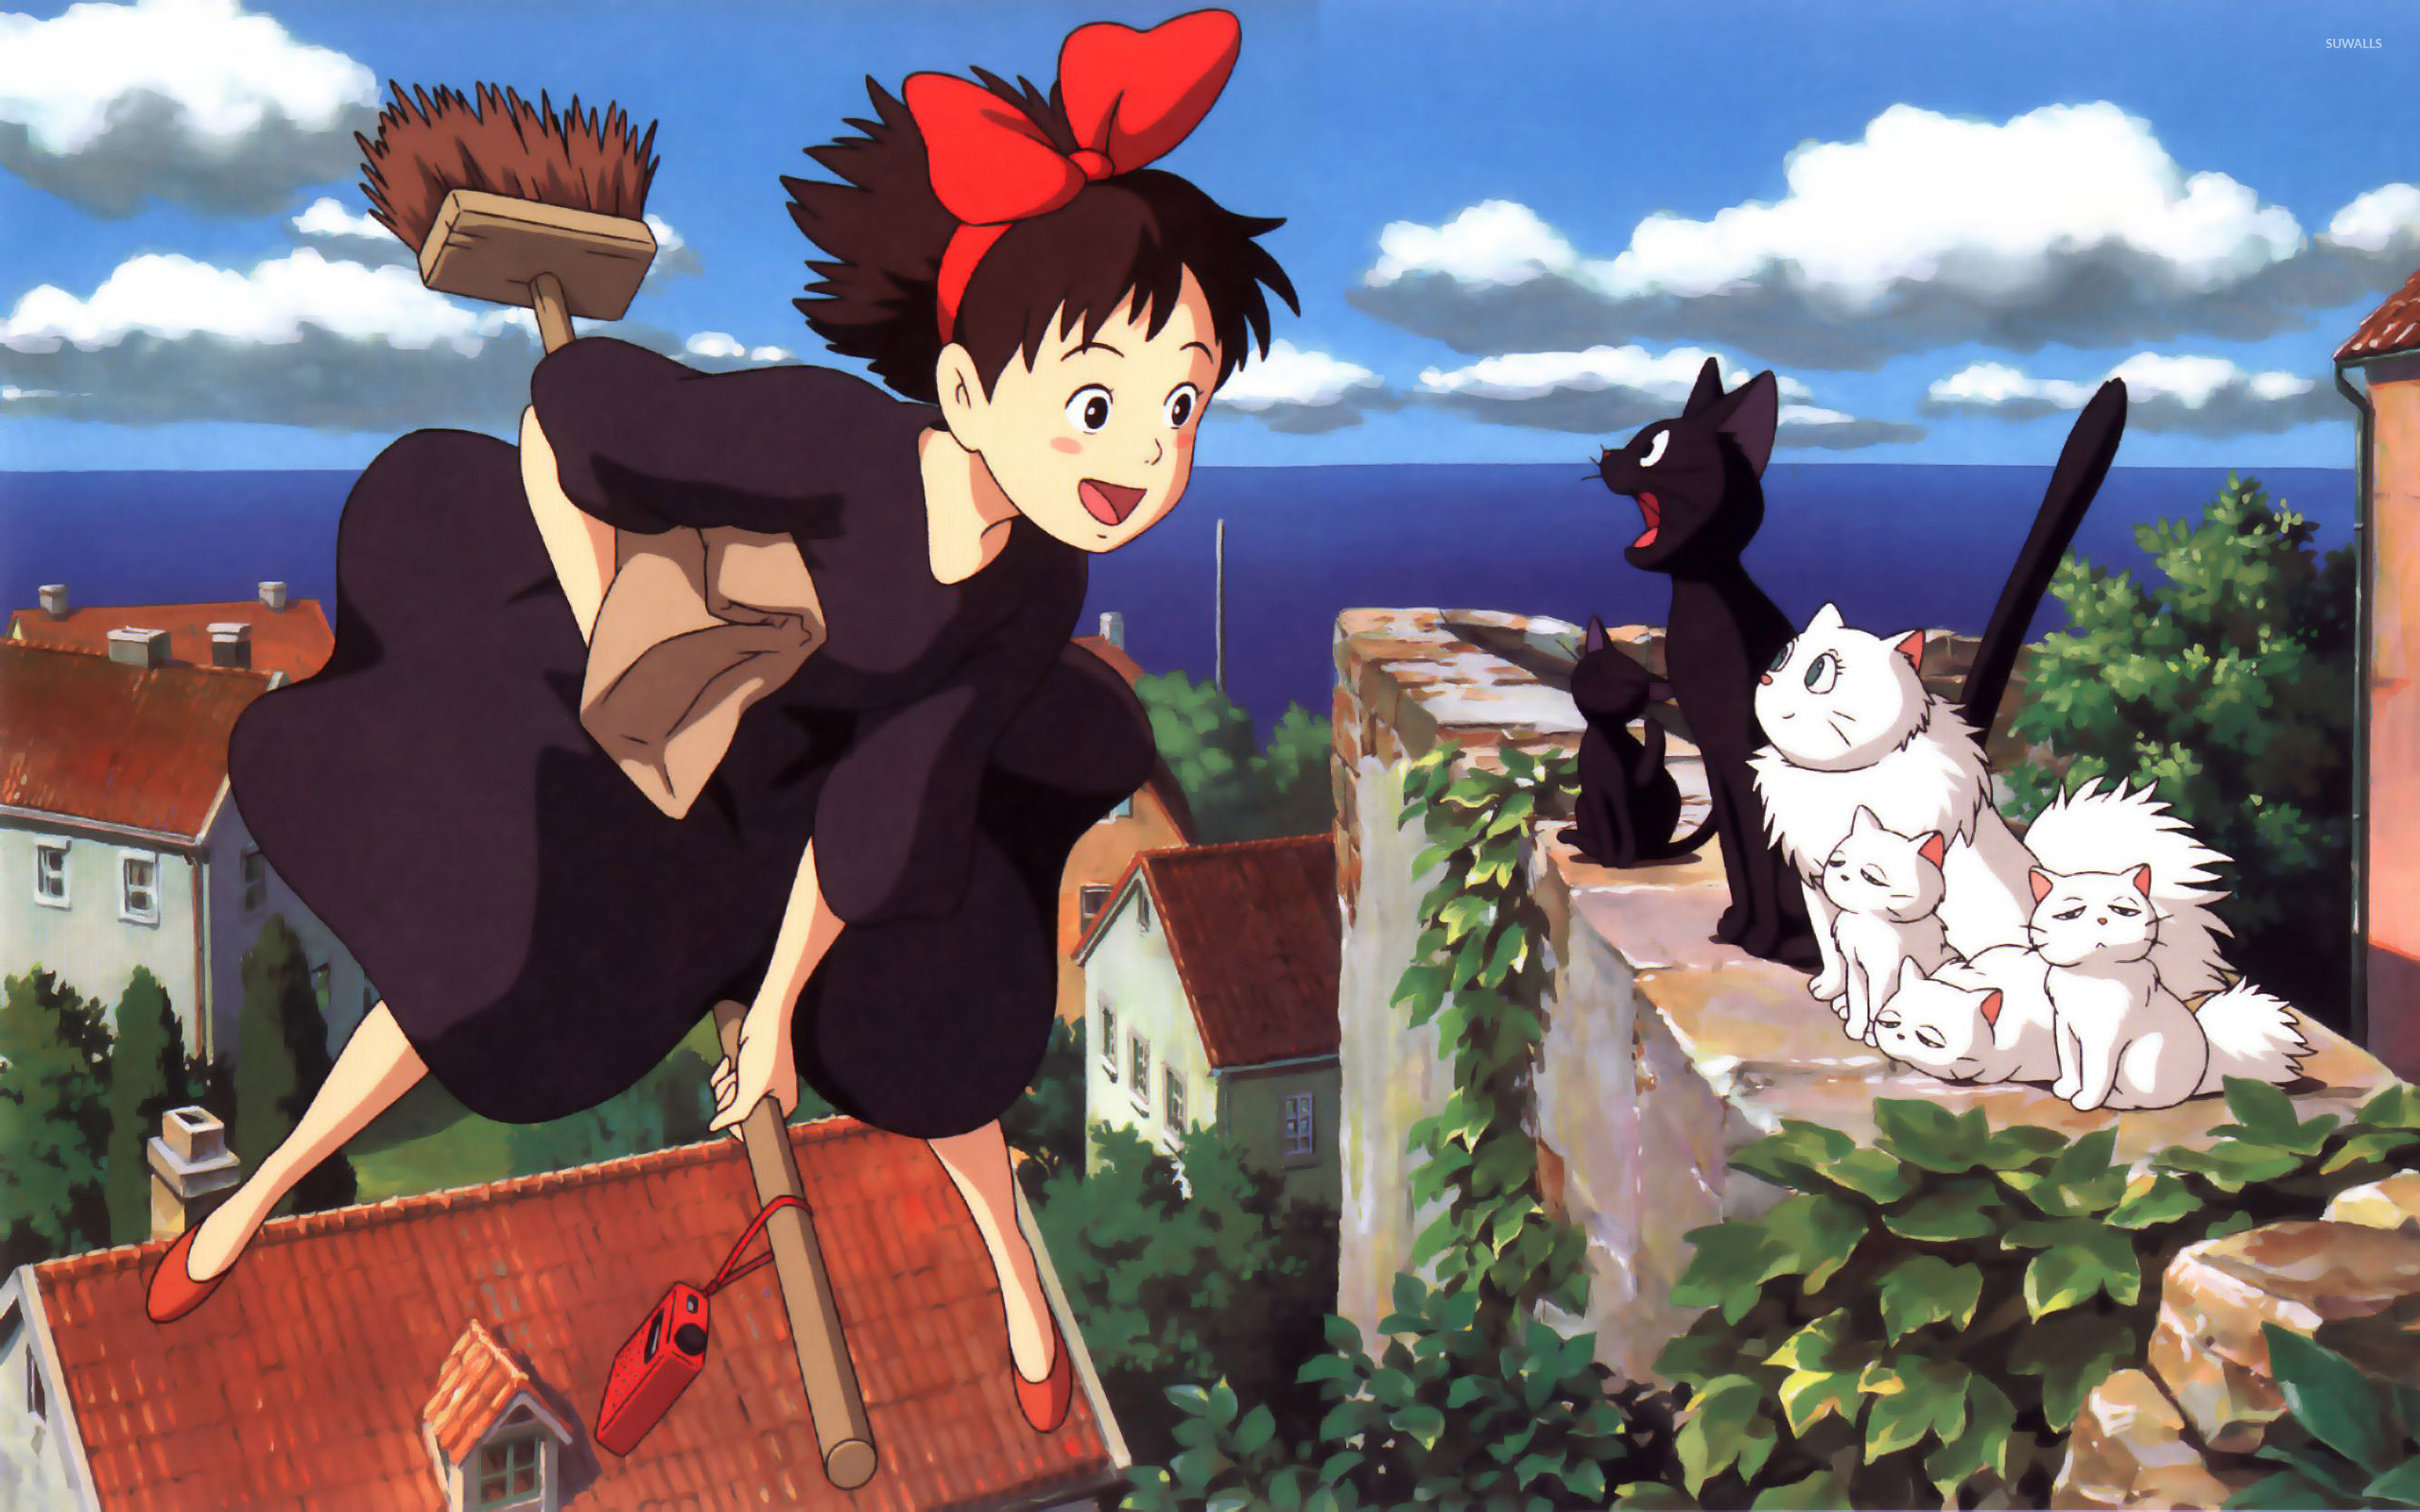 Kiki's Delivery Service Backgrounds, Compatible - PC, Mobile, Gadgets| 2560x1600 px